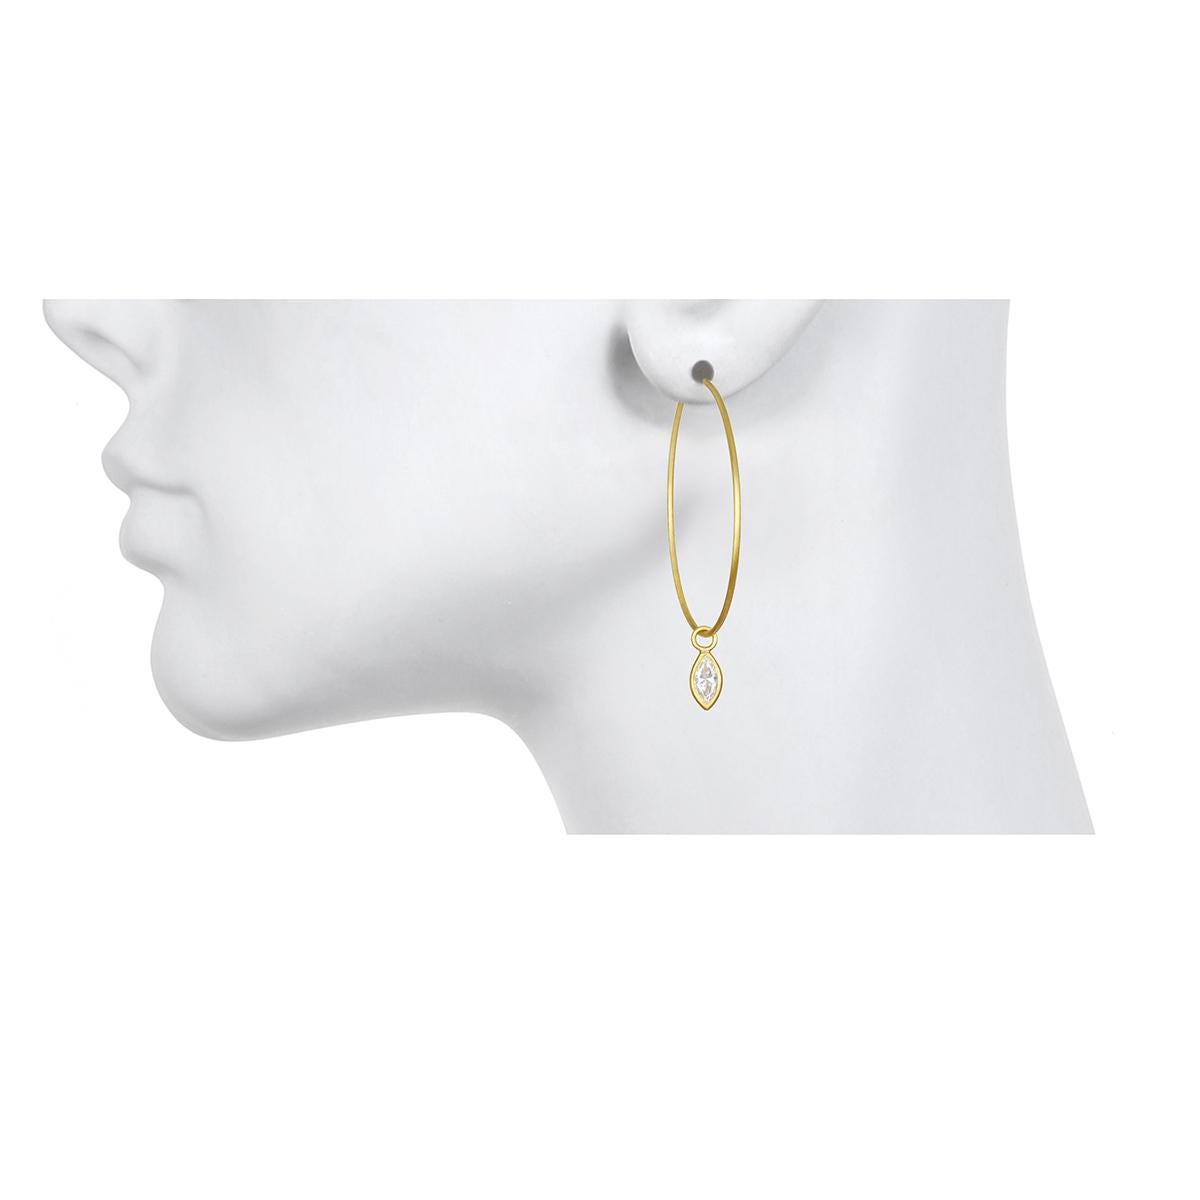 Contemporary Faye Kim 18 Karat Gold Hoops with Marquise Diamond Drops